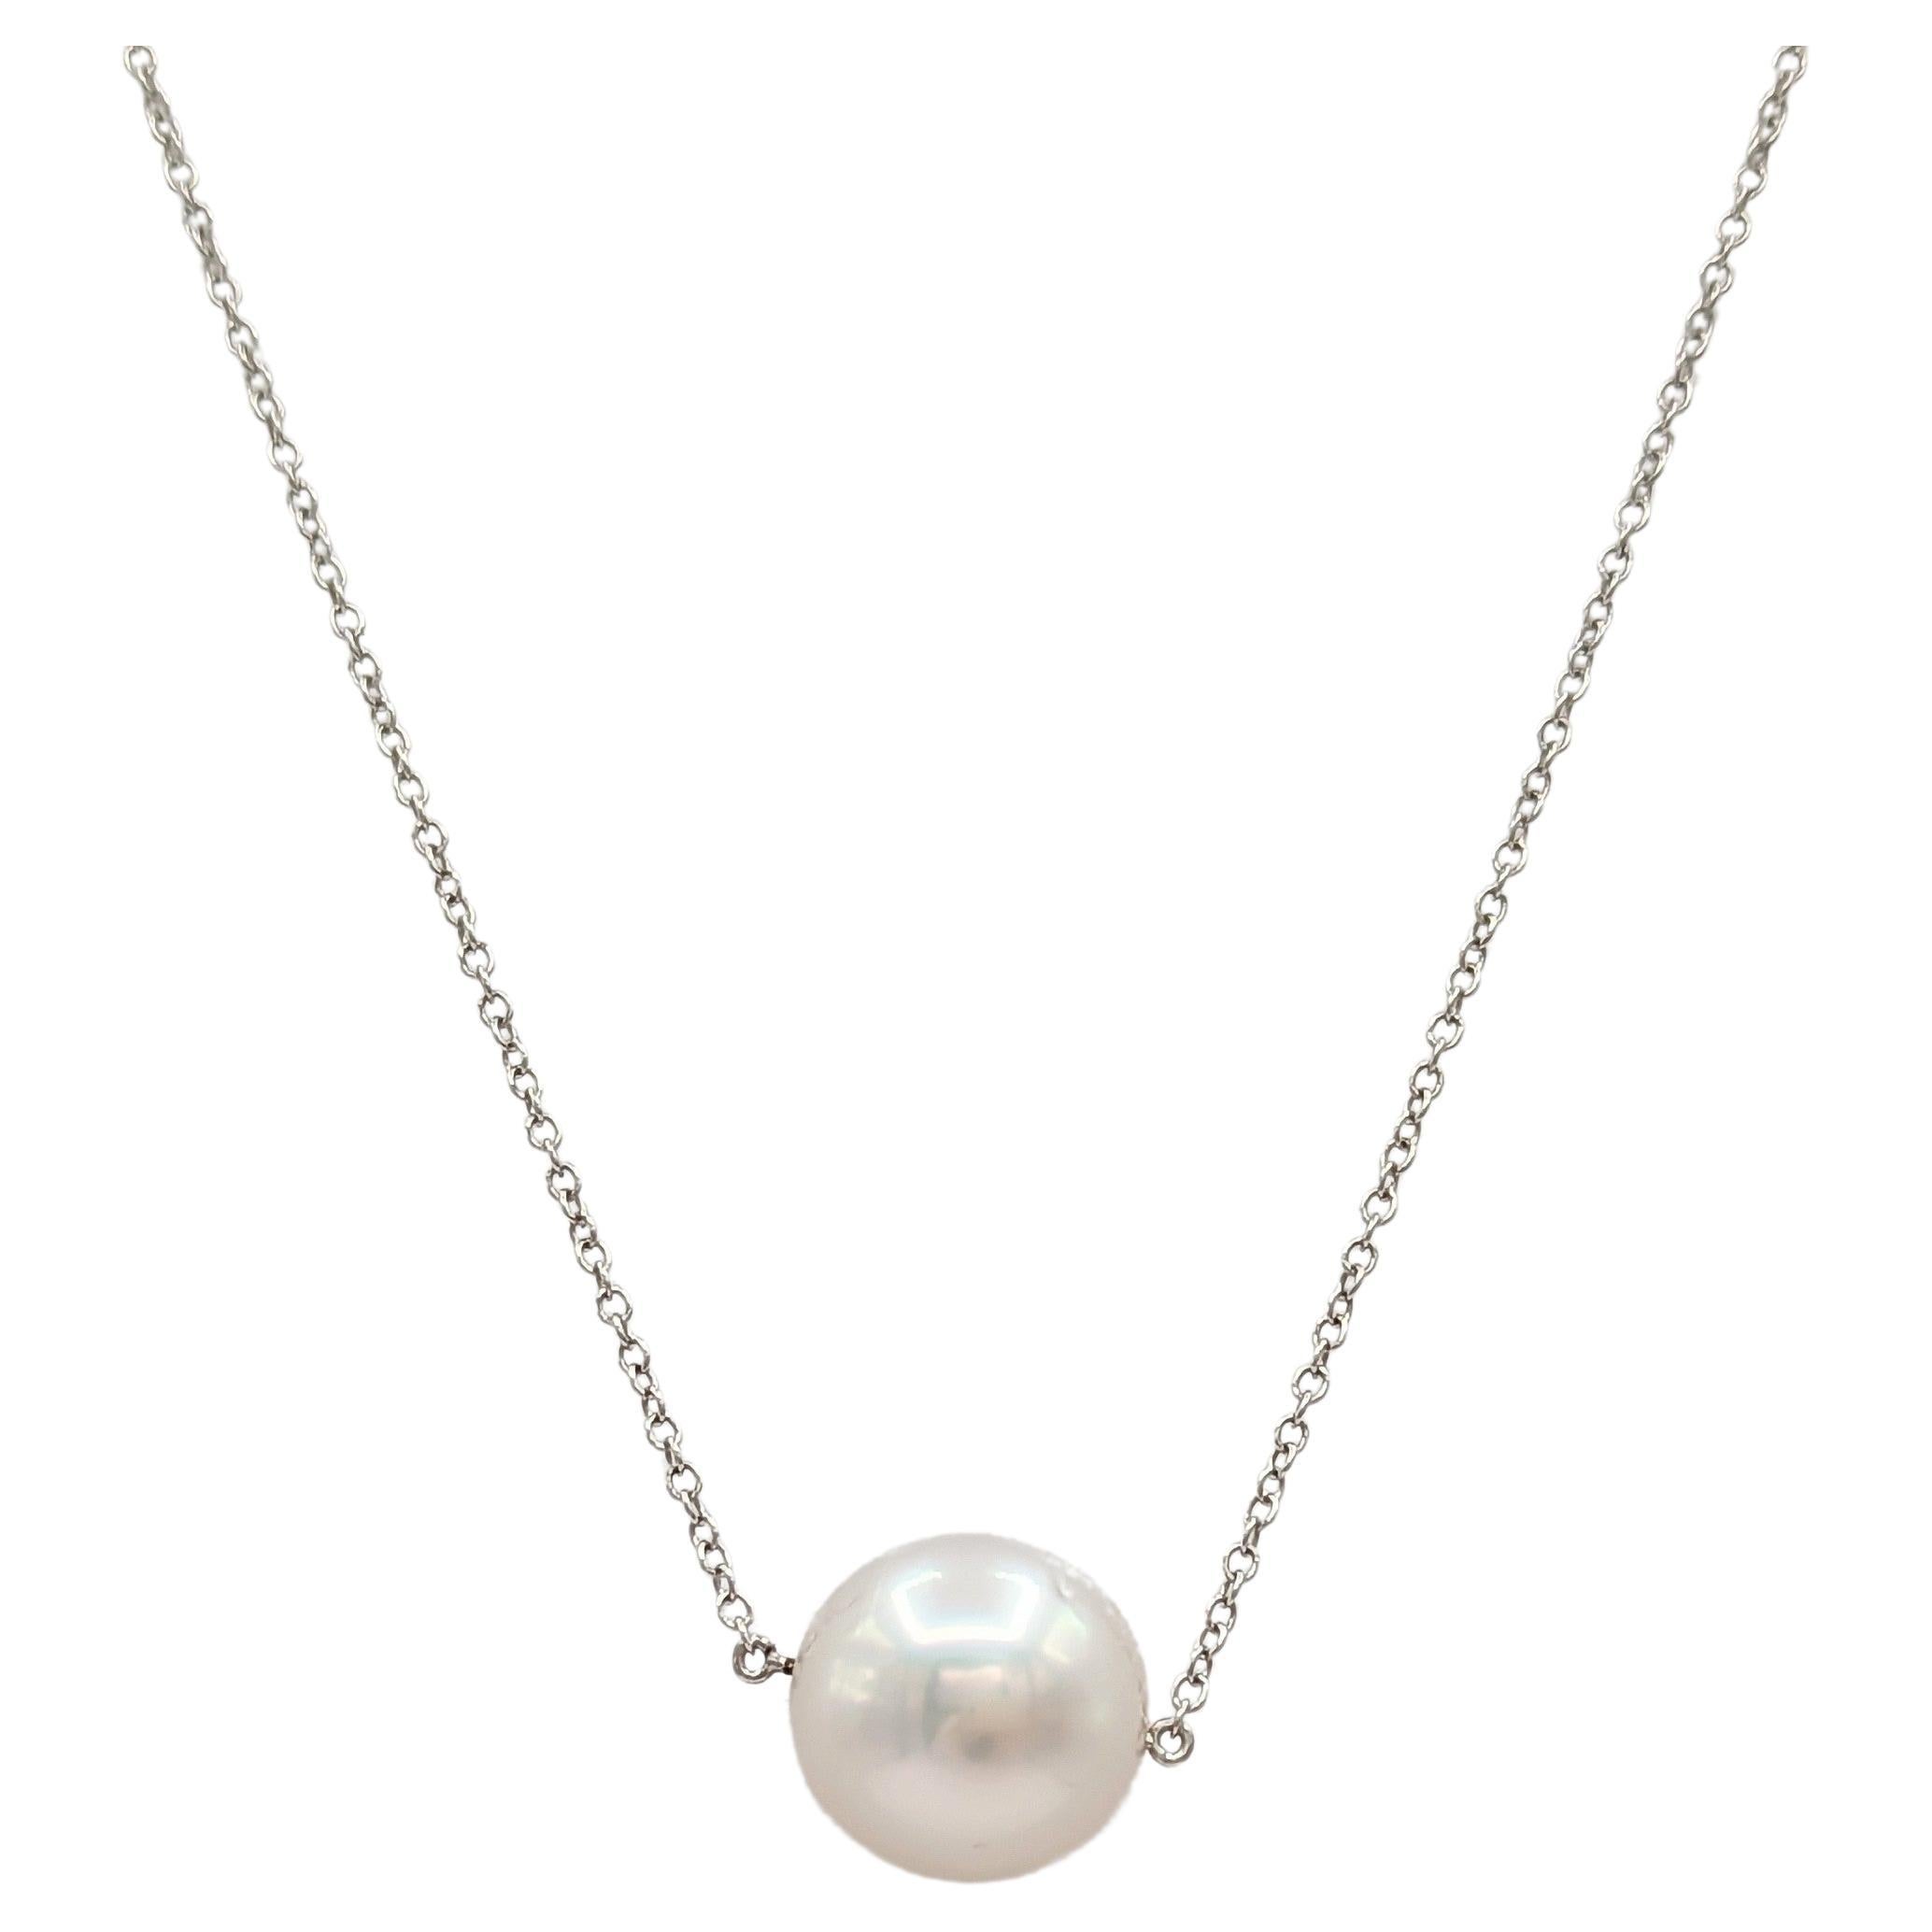 White South Sea Pearl Pendant Necklace in 18K White Gold